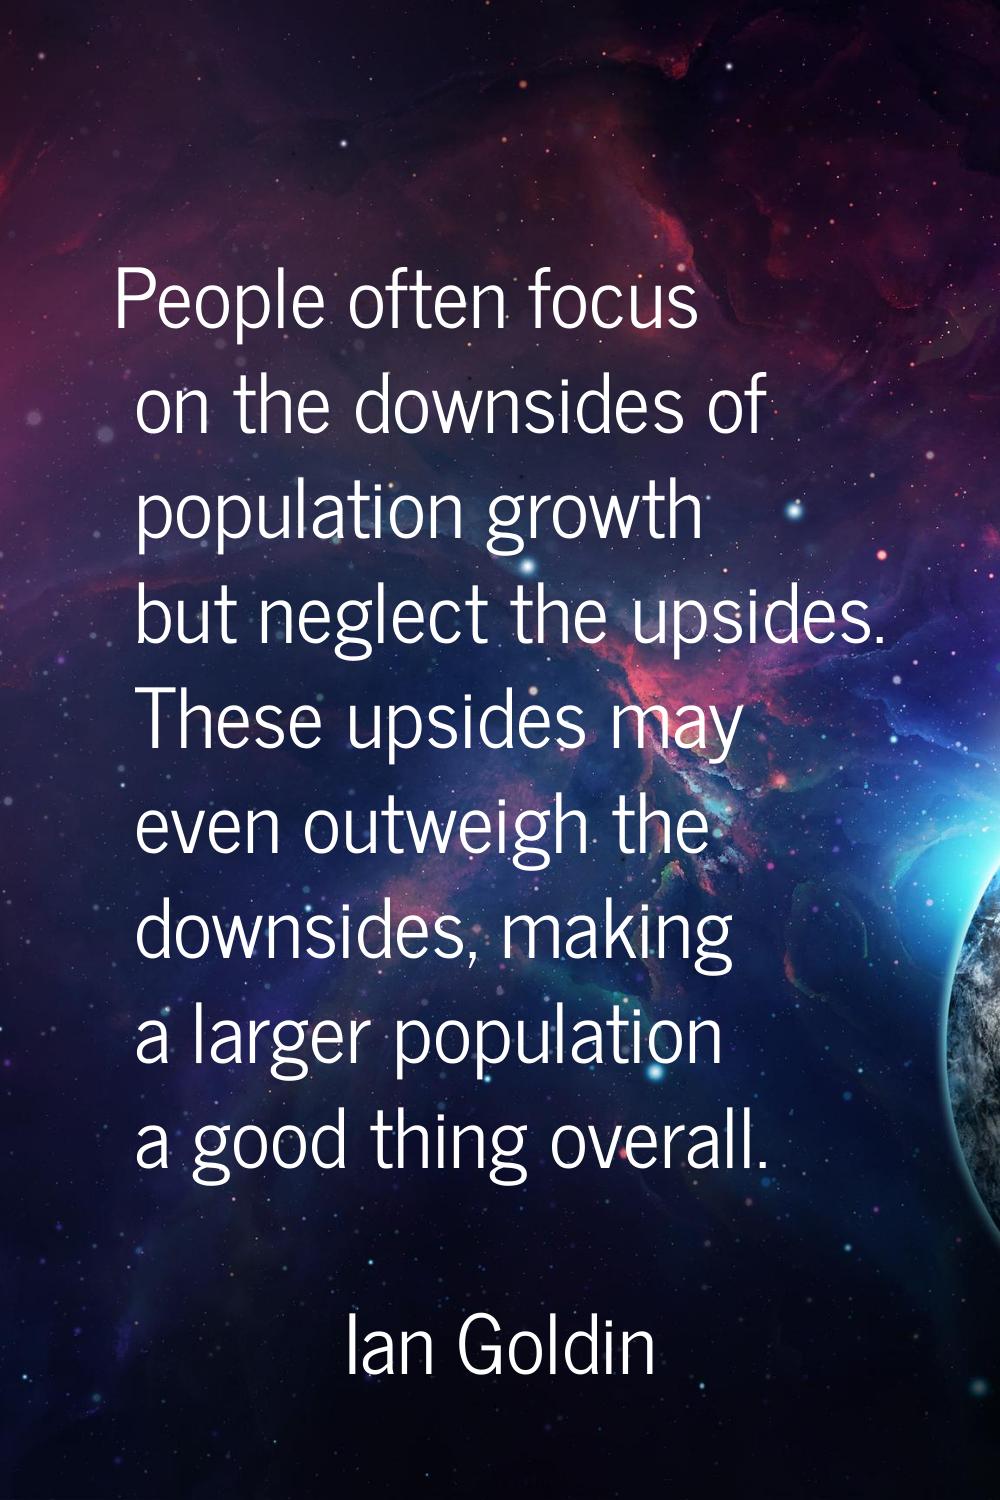 People often focus on the downsides of population growth but neglect the upsides. These upsides may